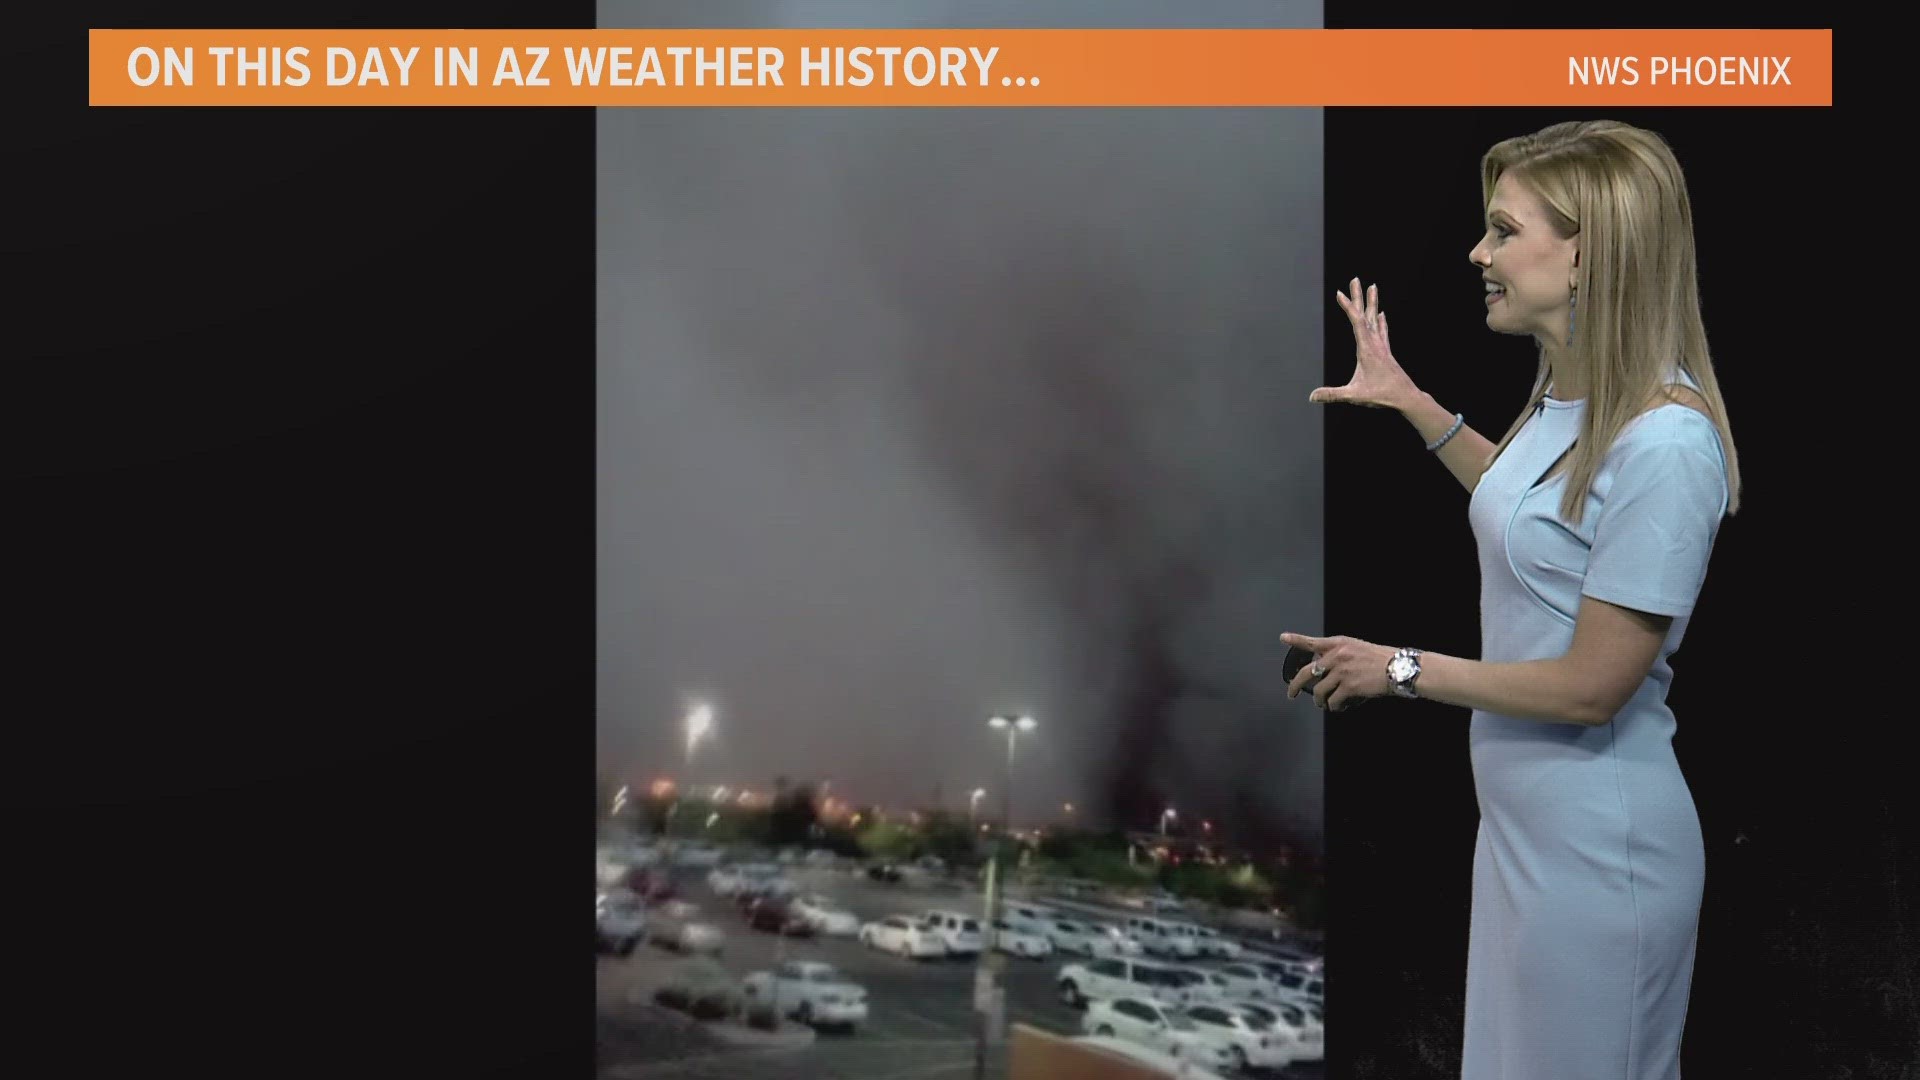 On July 5, 2011, a massive dust storm made its way across the Phoenix area. Krystle Henderson shares some of the eye-popping numbers from the haboob.